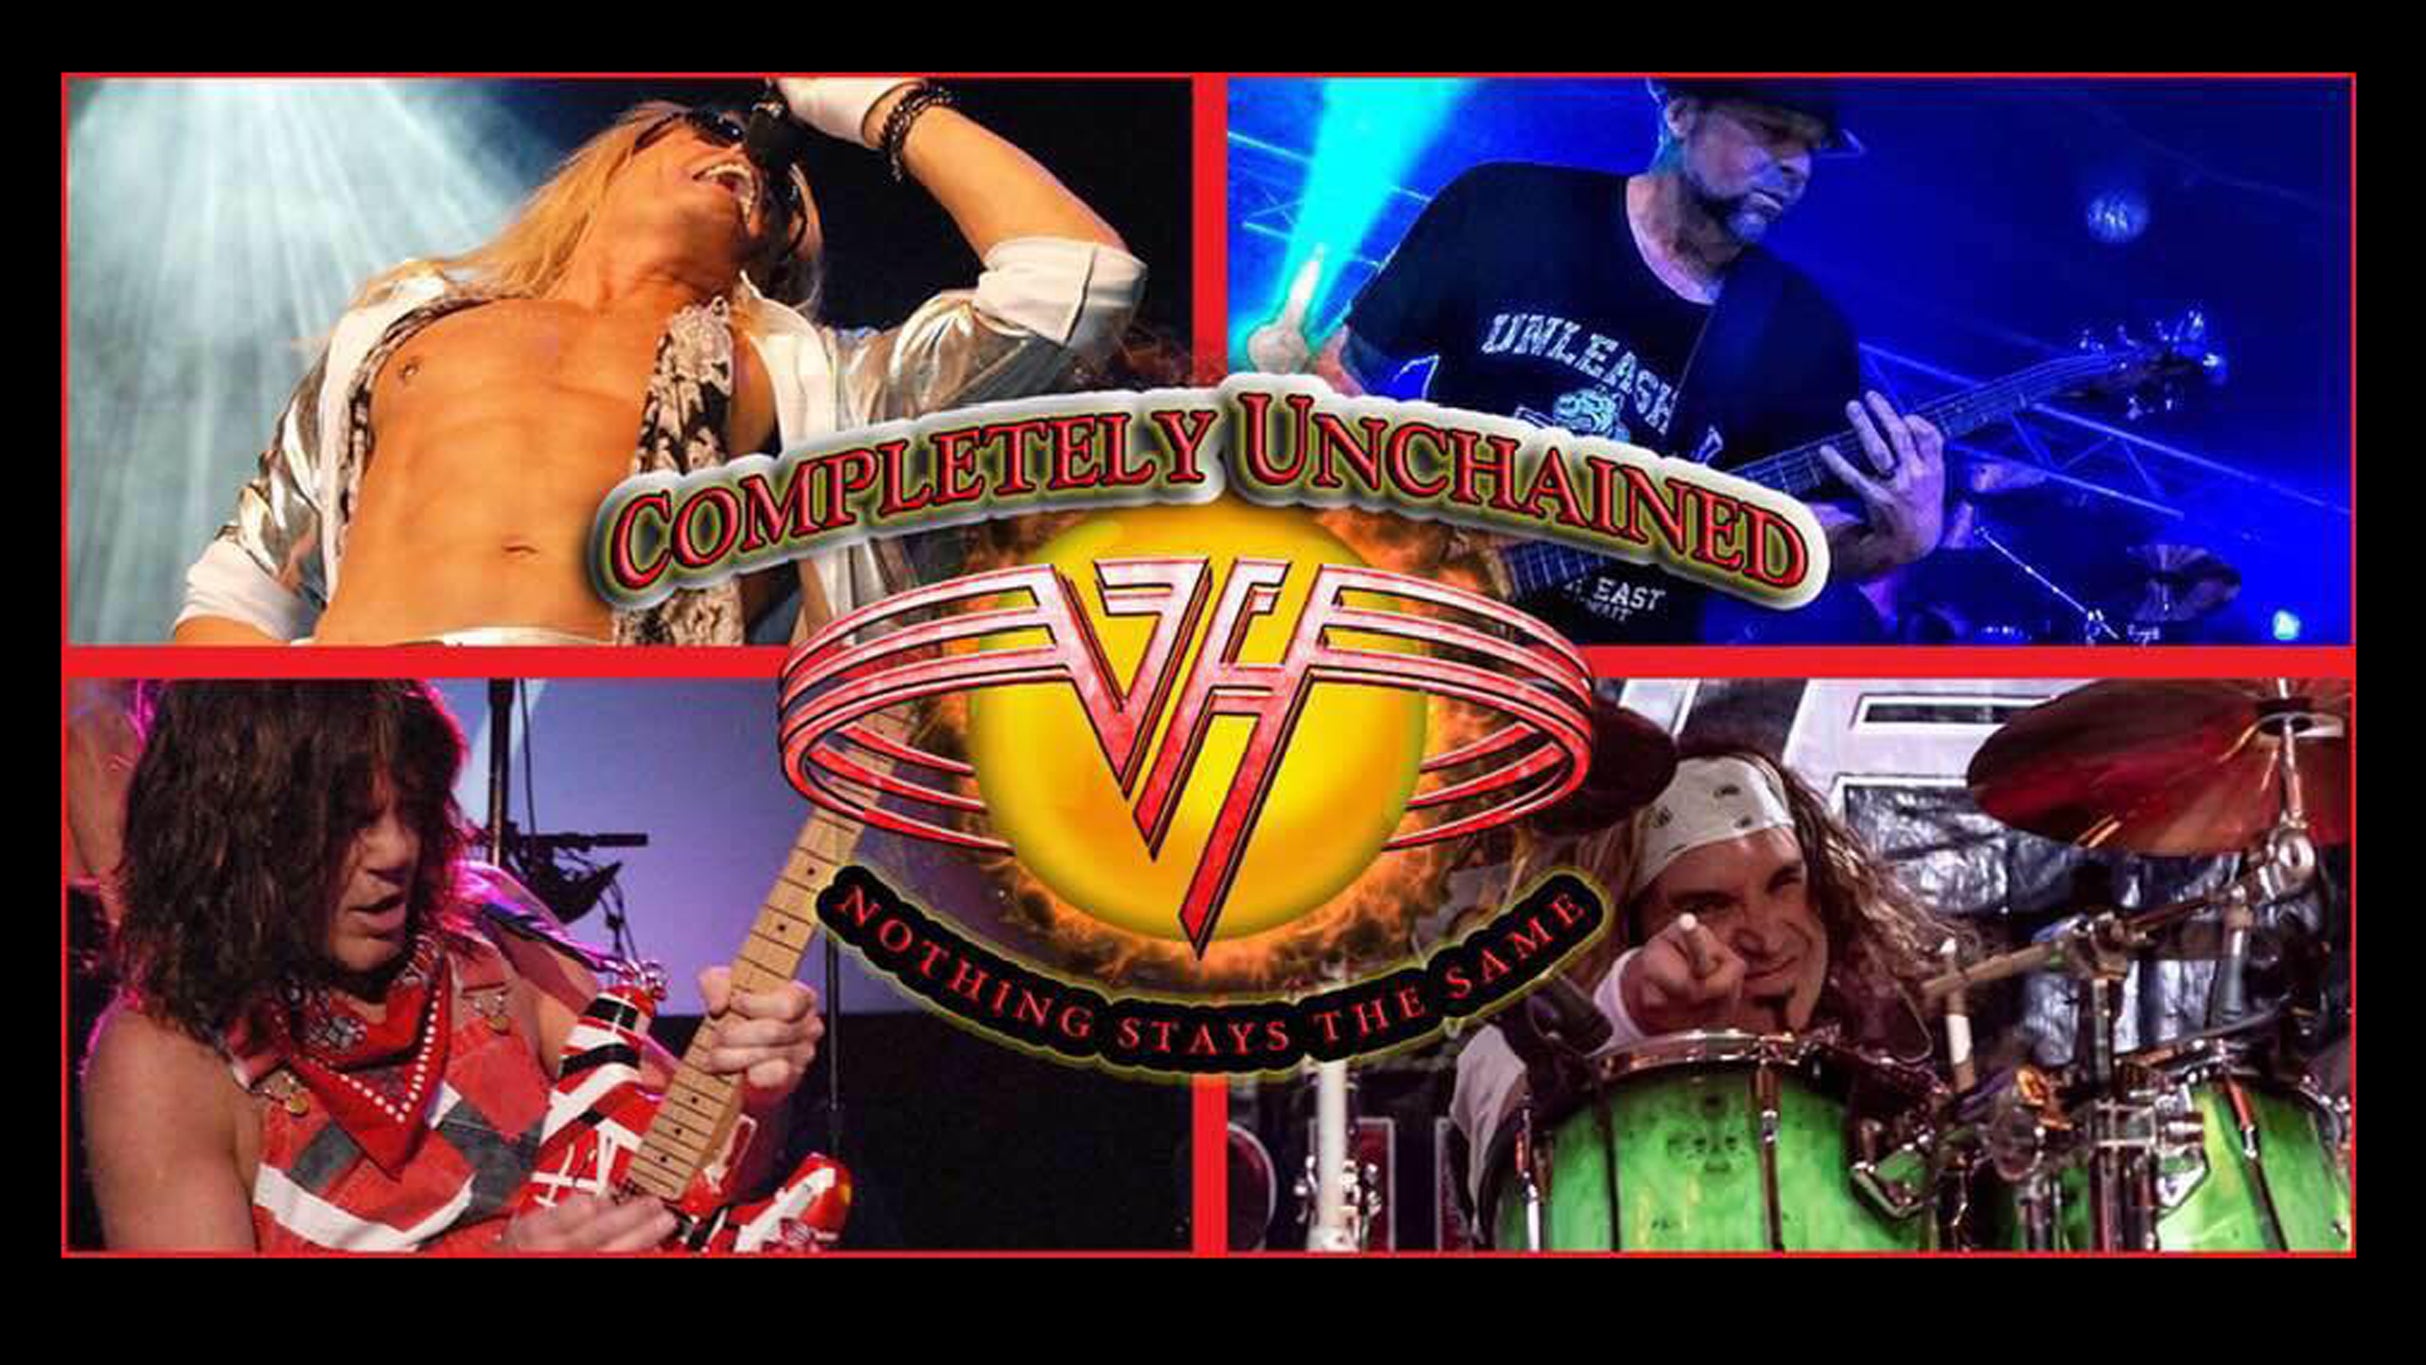 Completely Unchained - The Ultimate Van Halen Production in Hampton promo photo for Venue presale offer code